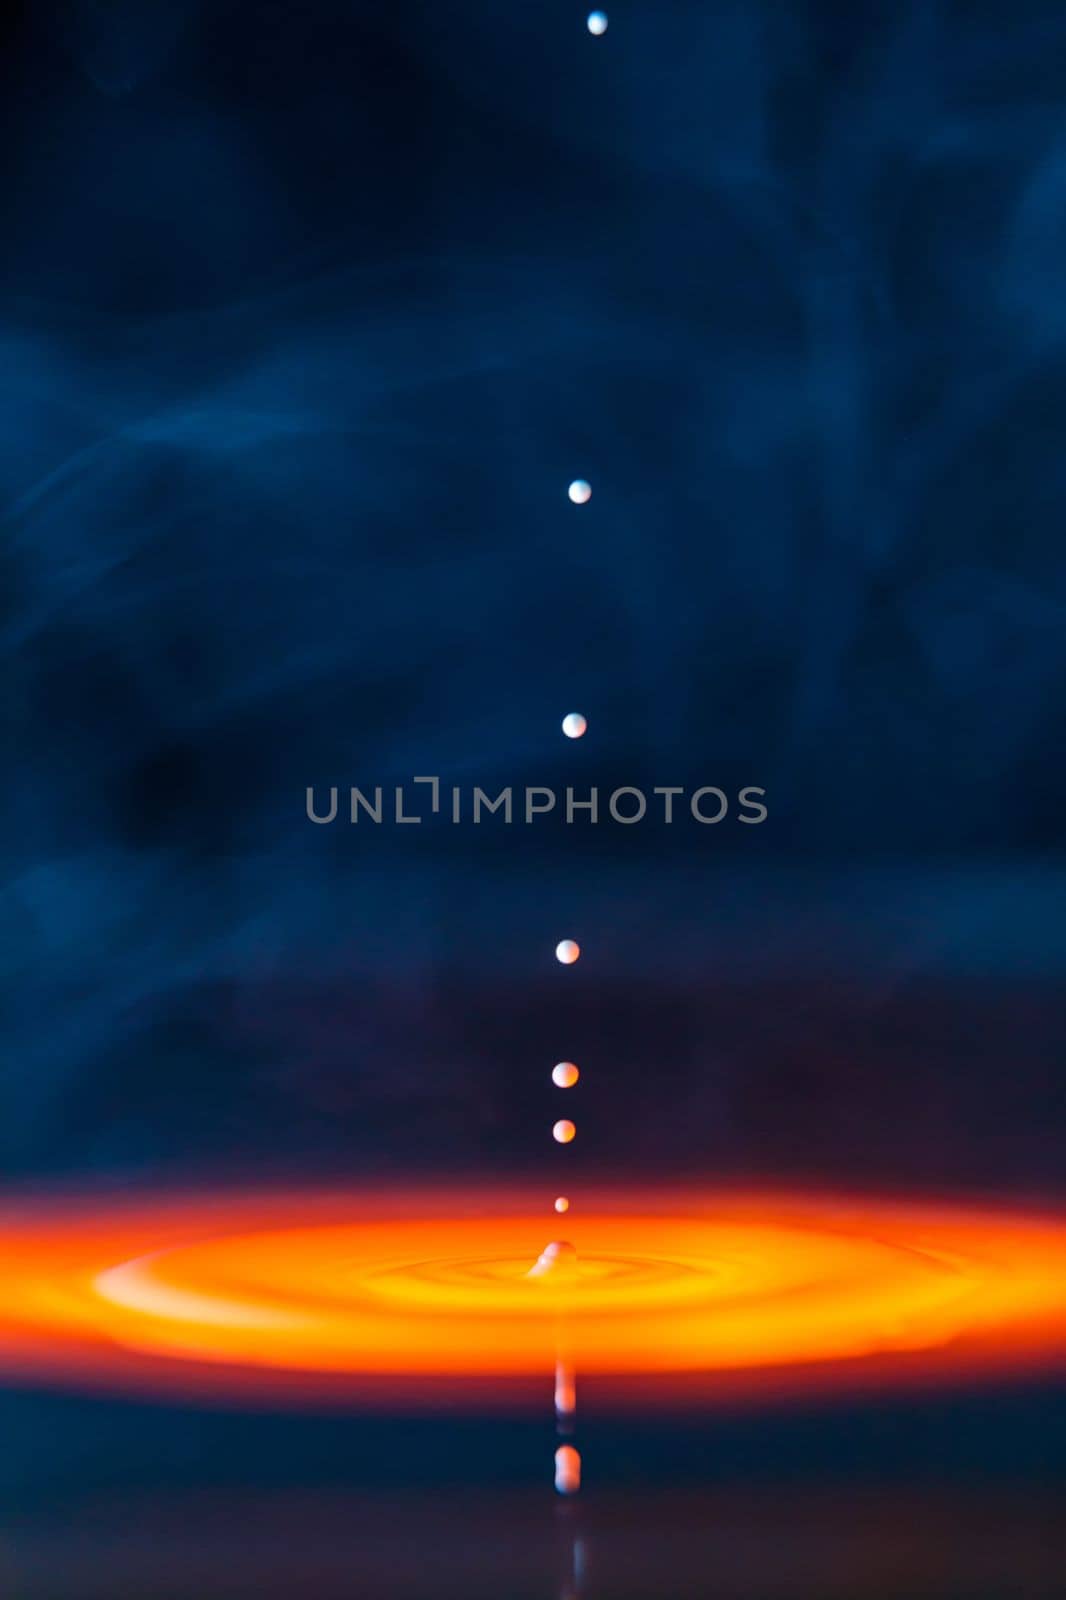 The drop falls into a thick liquid with a blue-yellow background in the smoke. Abstract colorful background